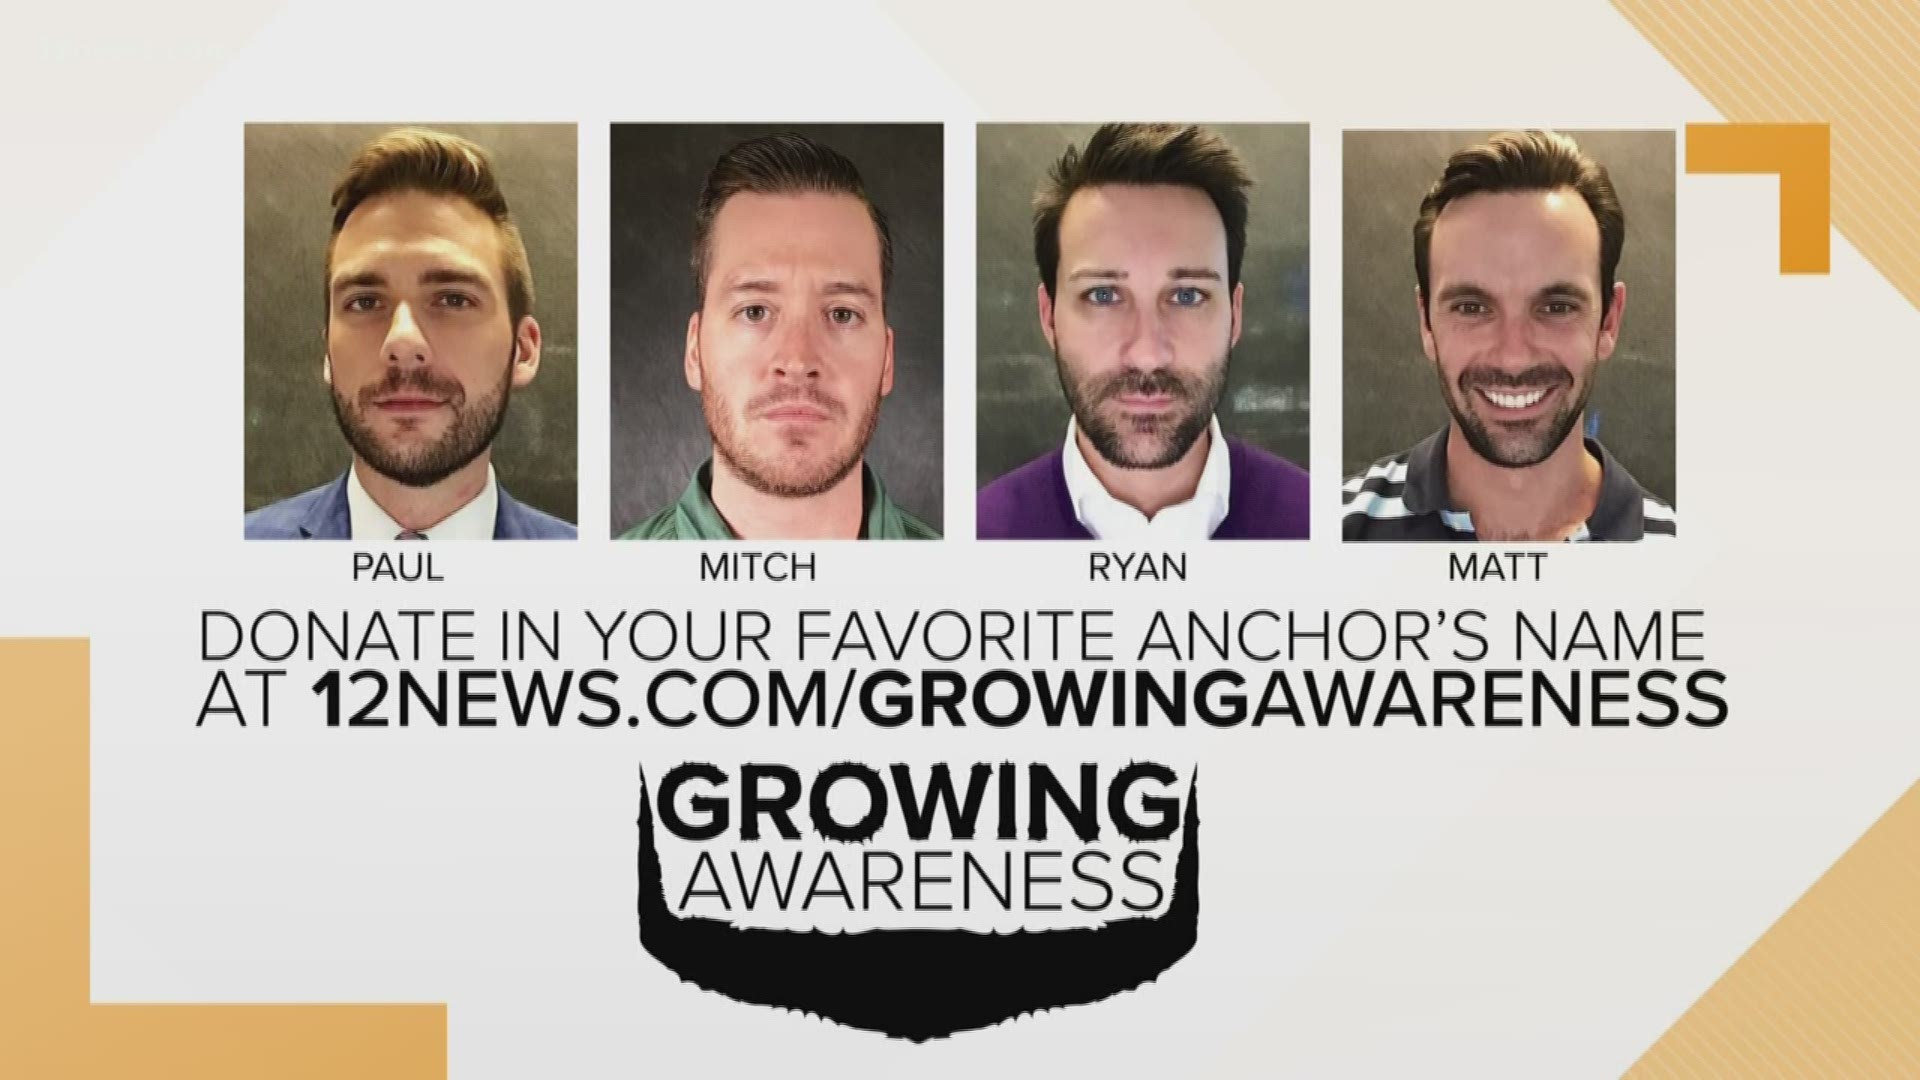 Here's the latest update on the progress of our Team 12 members participating in the "Growing Awareness" campaign.